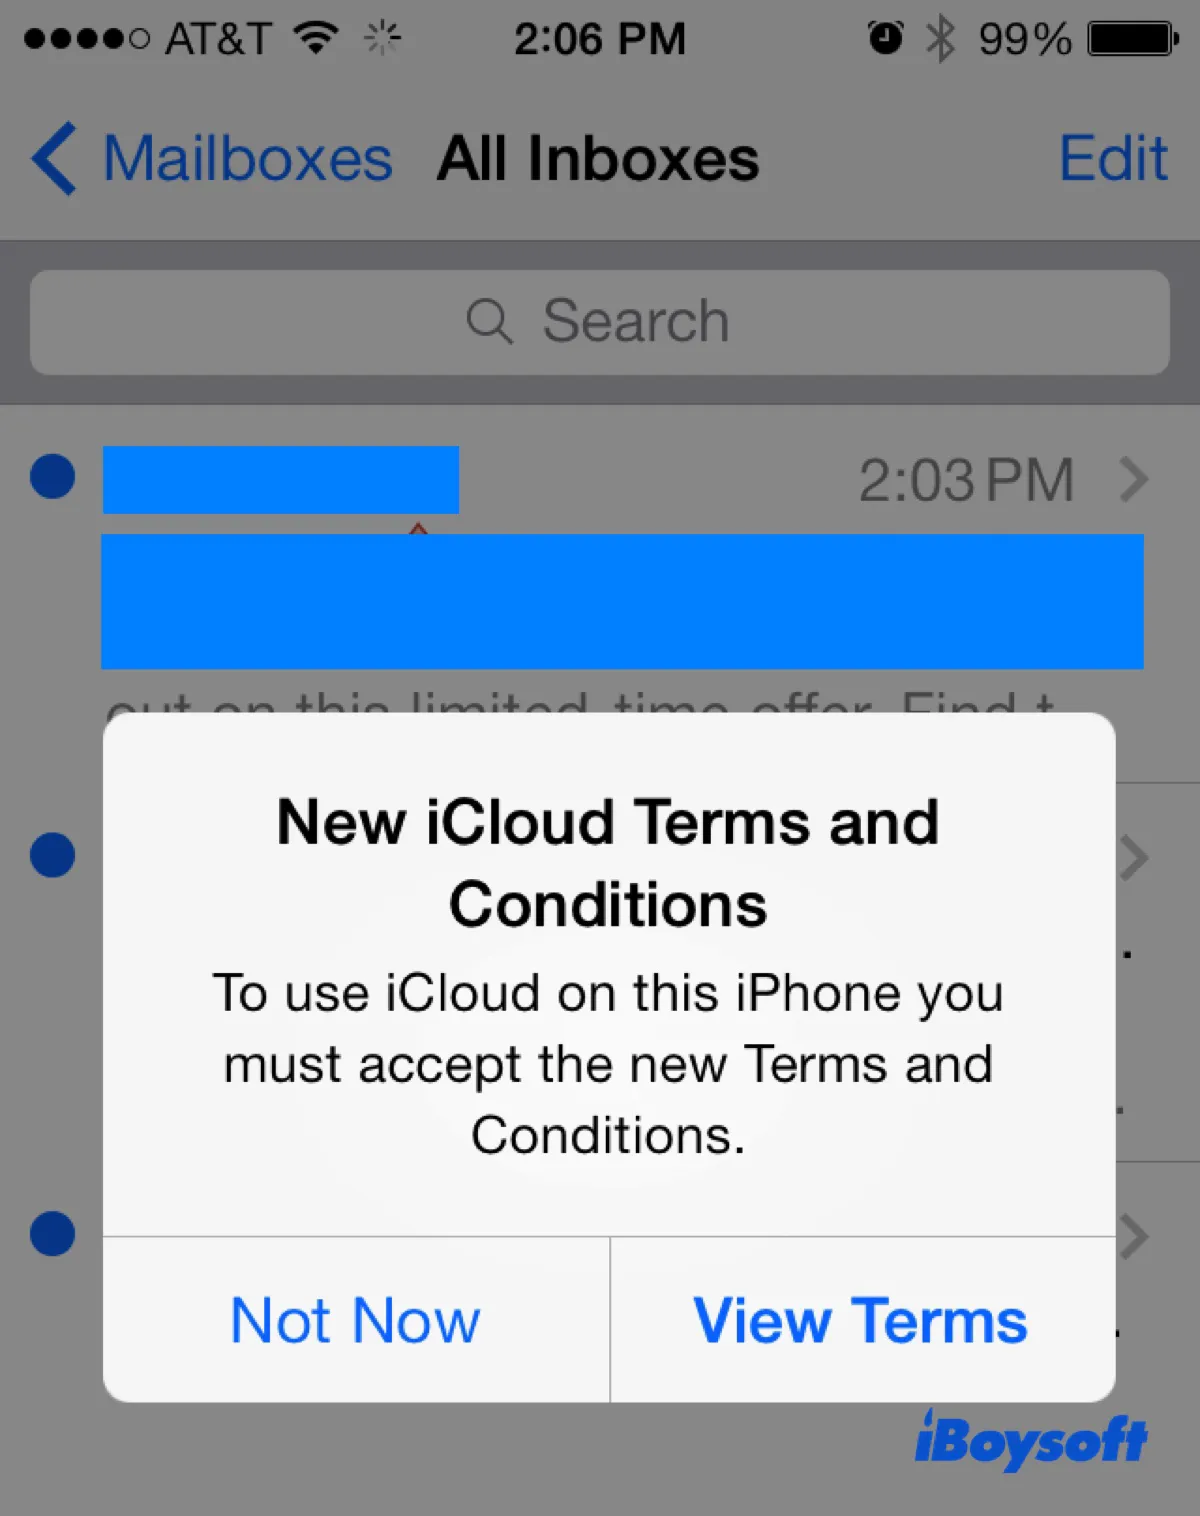 New iCloud Terms and Conditions keeps popping up on iPhone